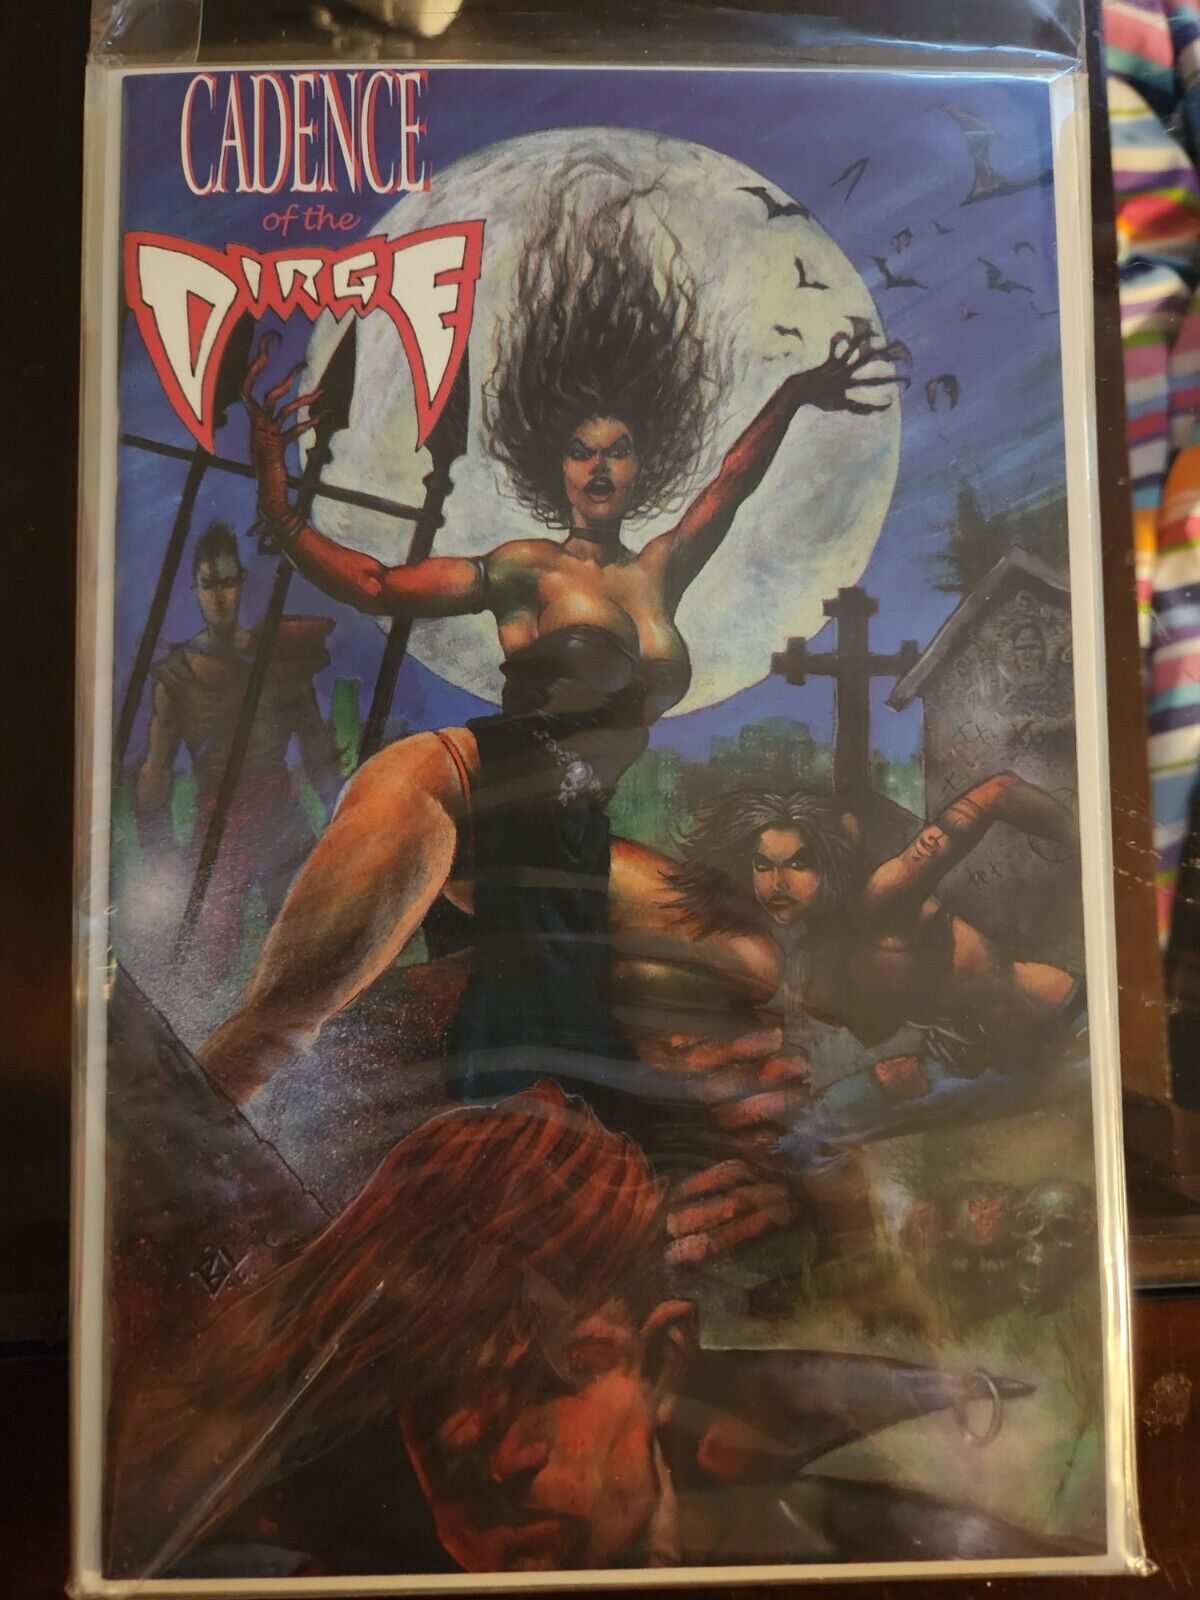 Cadence Of The Dirge #1 1996 GOTHIC COMIC BOOK V40-58